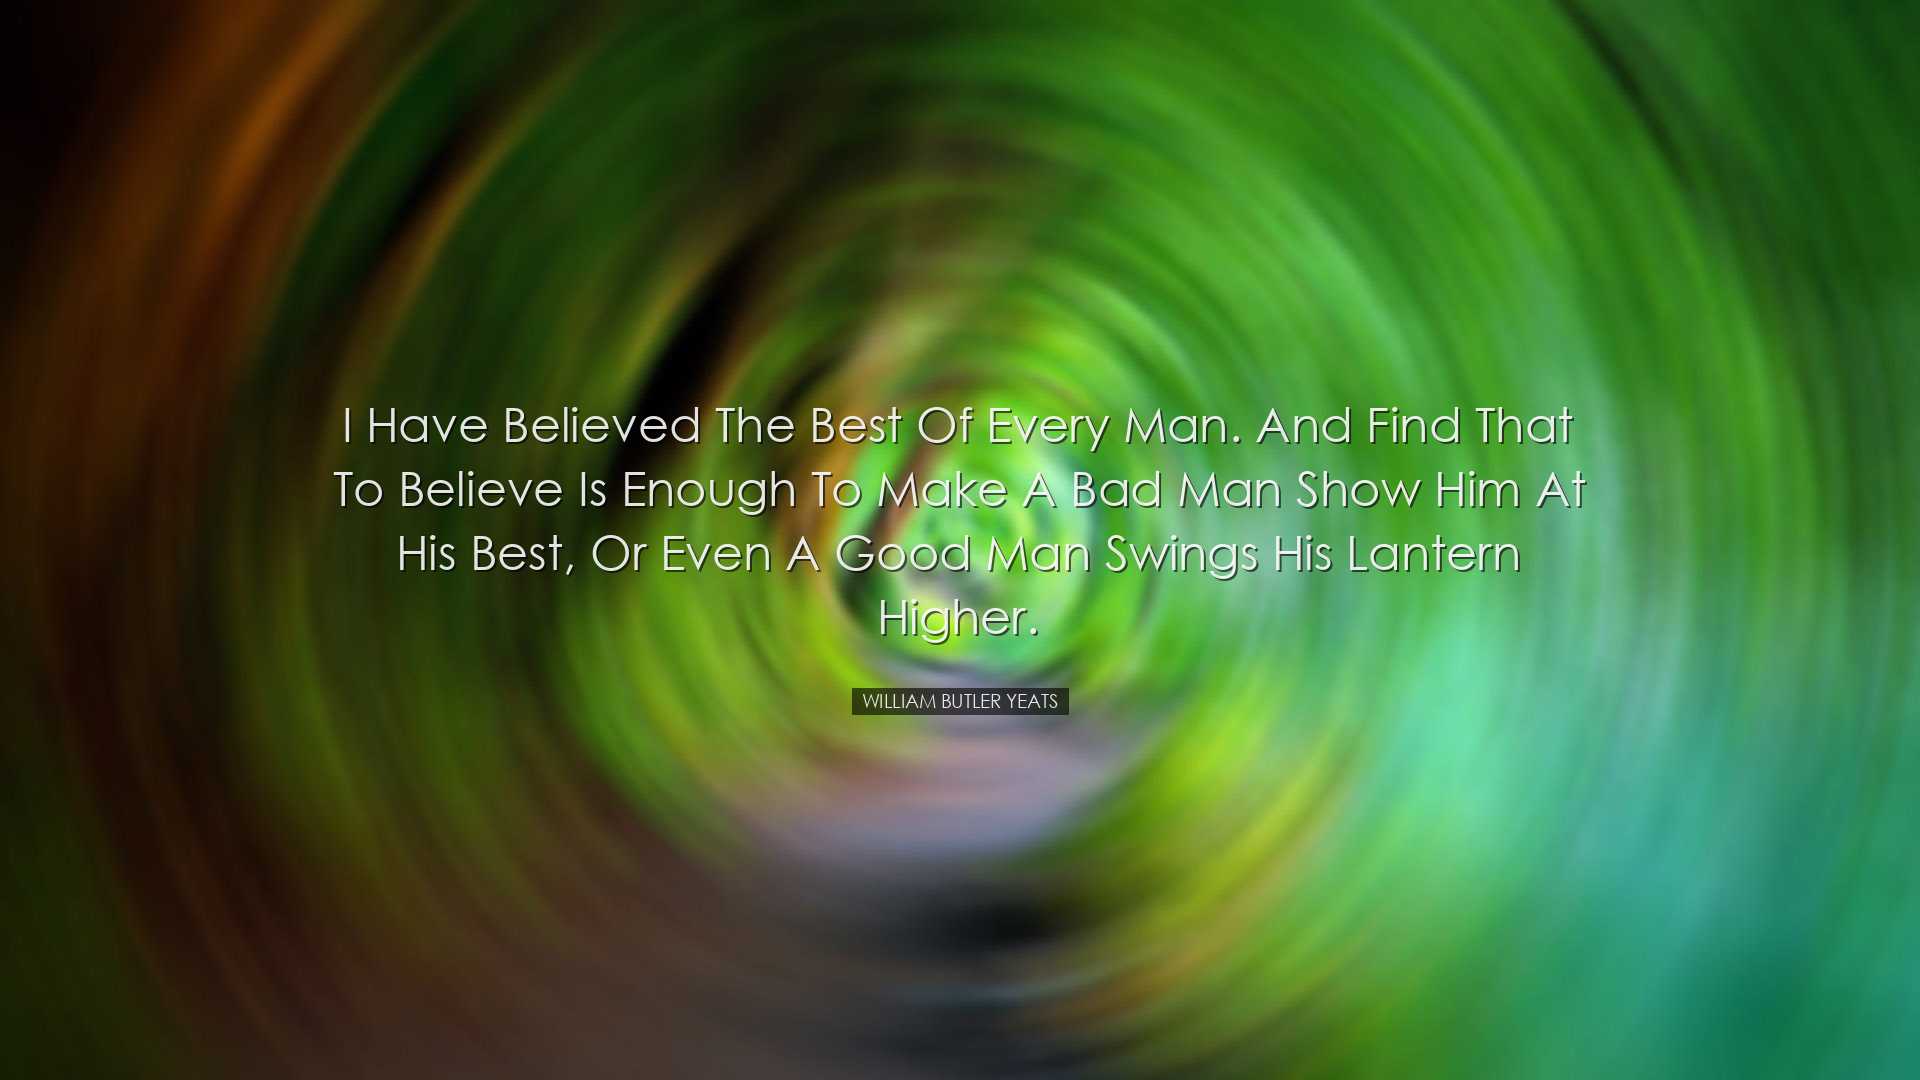 I have believed the best of every man. And find that to believe is